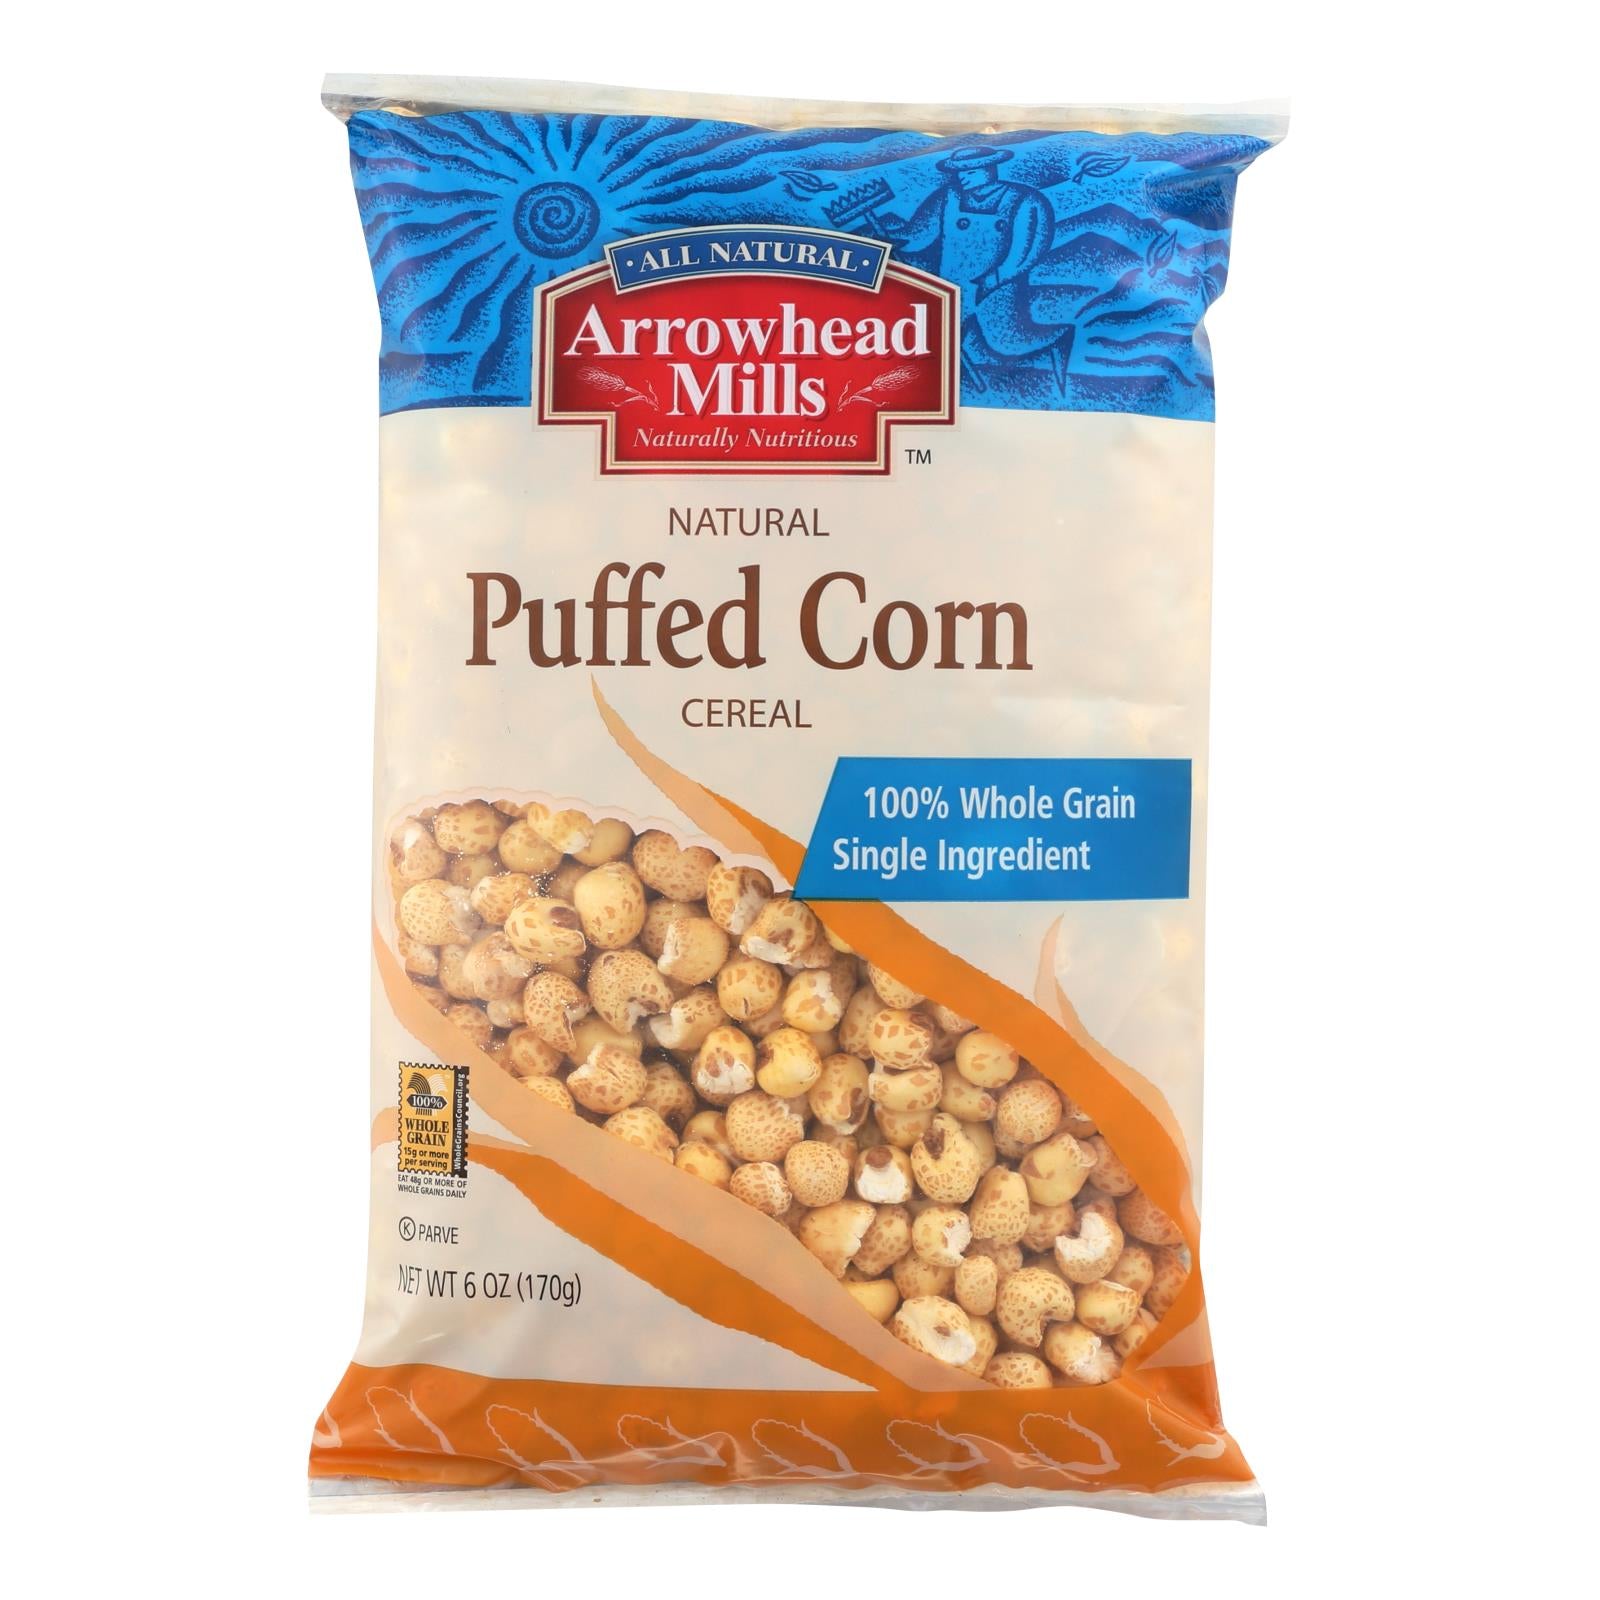 Arrowhead Mills, Arrowhead Mills - All Natural Puffed Corn Cereal - Case of 12 - 6 oz. (Pack of 12)